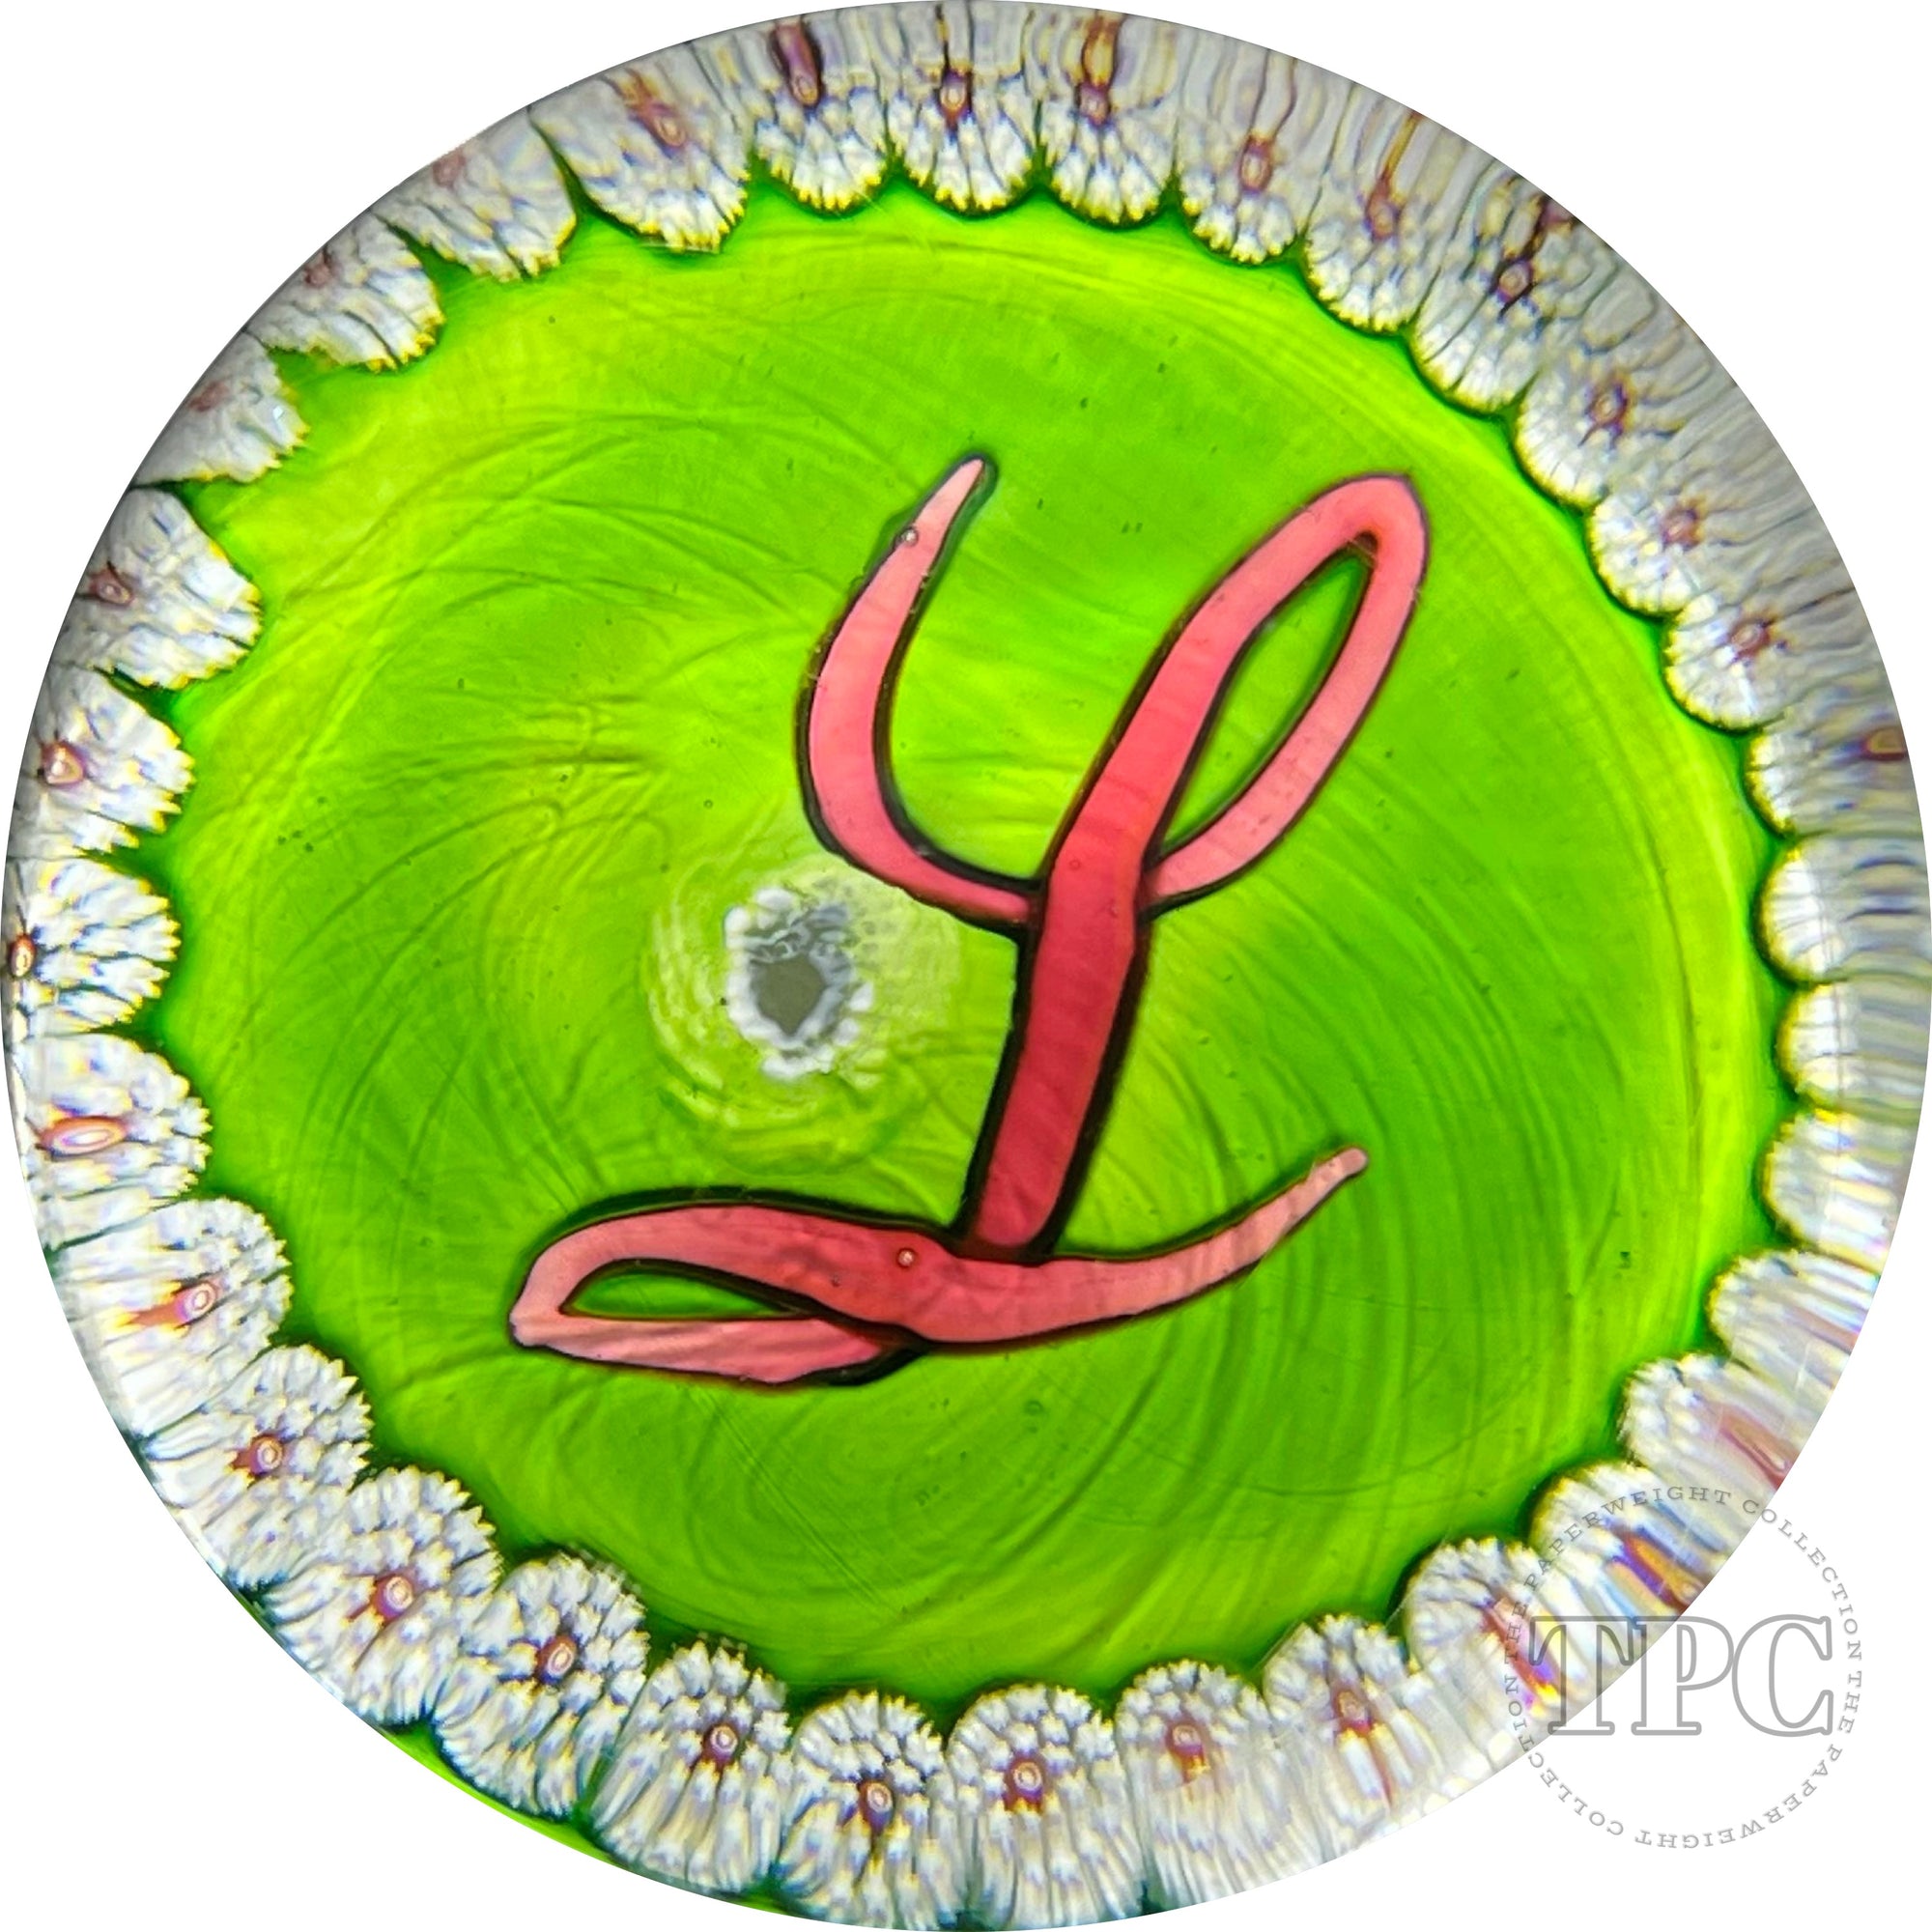 Antique Saint-Louis Glass Art Paperweight Lampwork Initial L on Opaque Pistachio Green Ground with Millefiori Garland